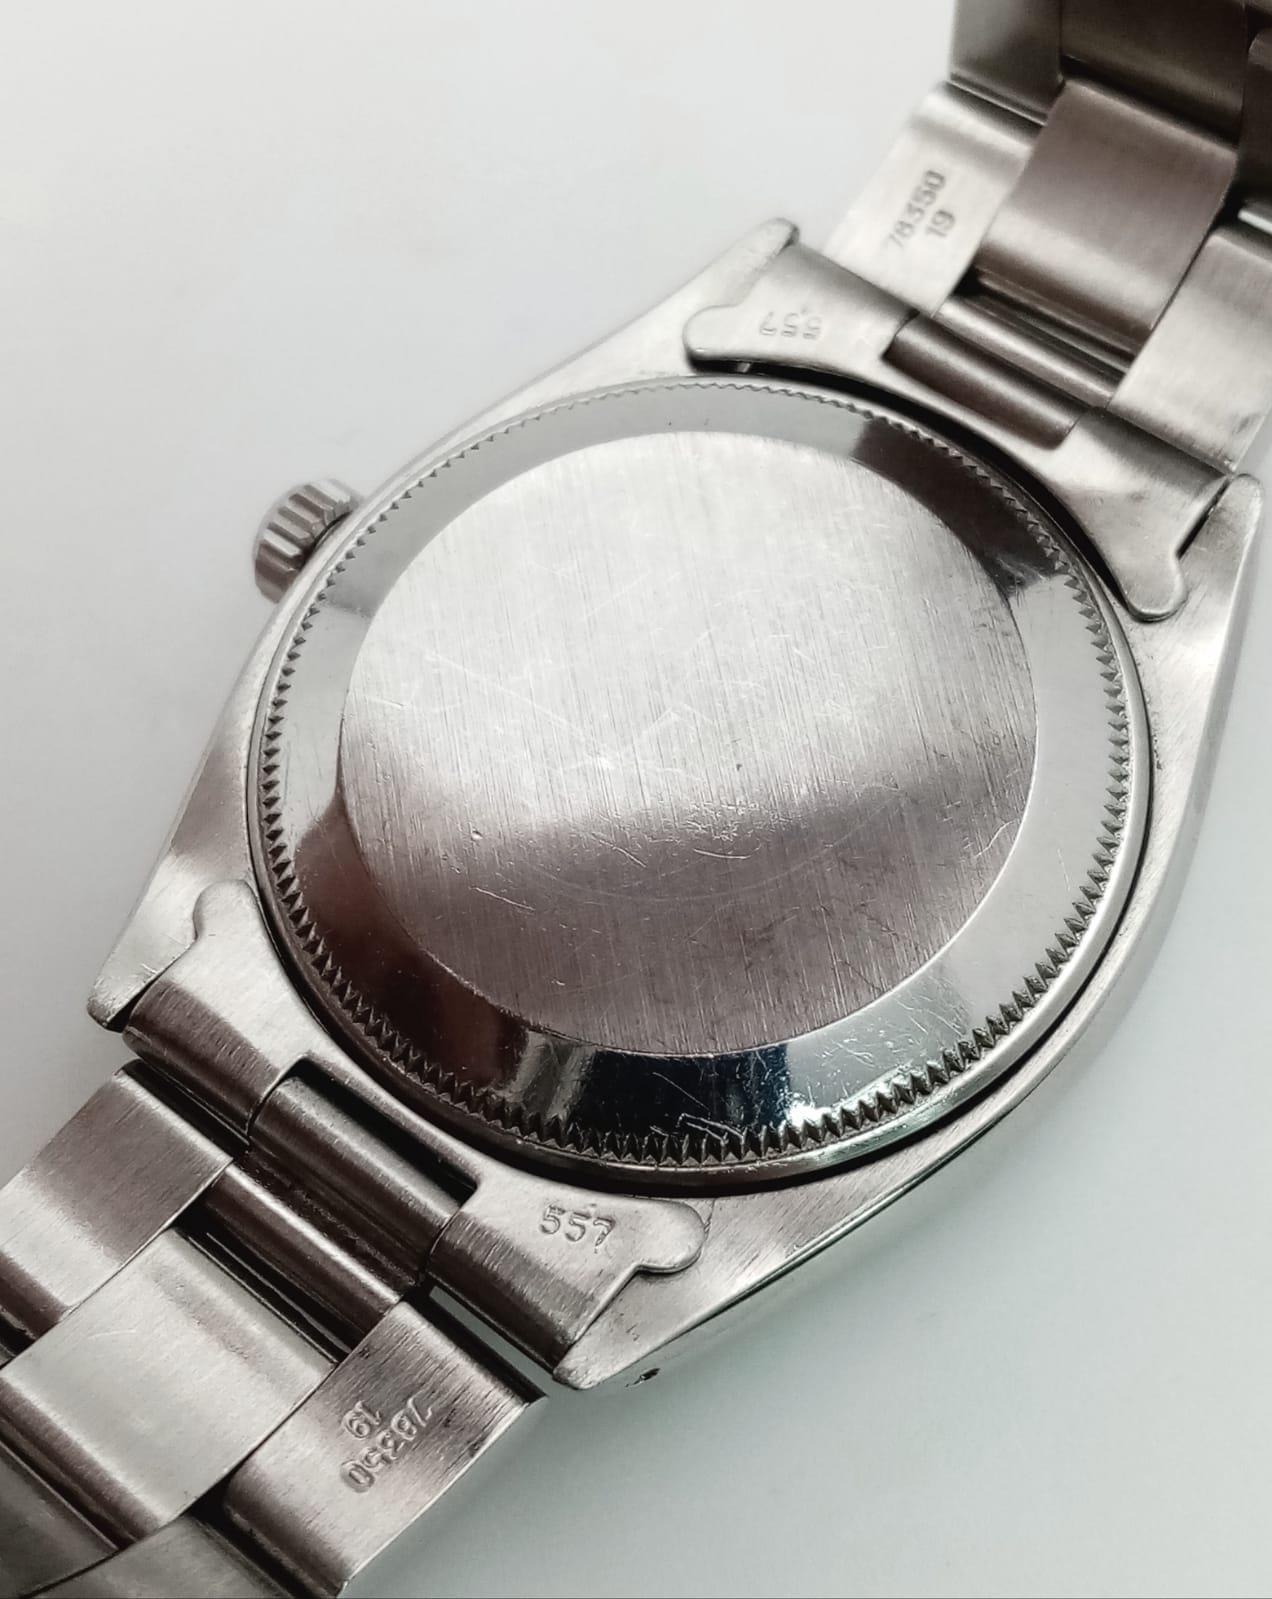 A Vintage Rolex Oyster Perpetual Gents Watch. Stainless steel bracelet and case - 34mm. Automatic - Image 7 of 9